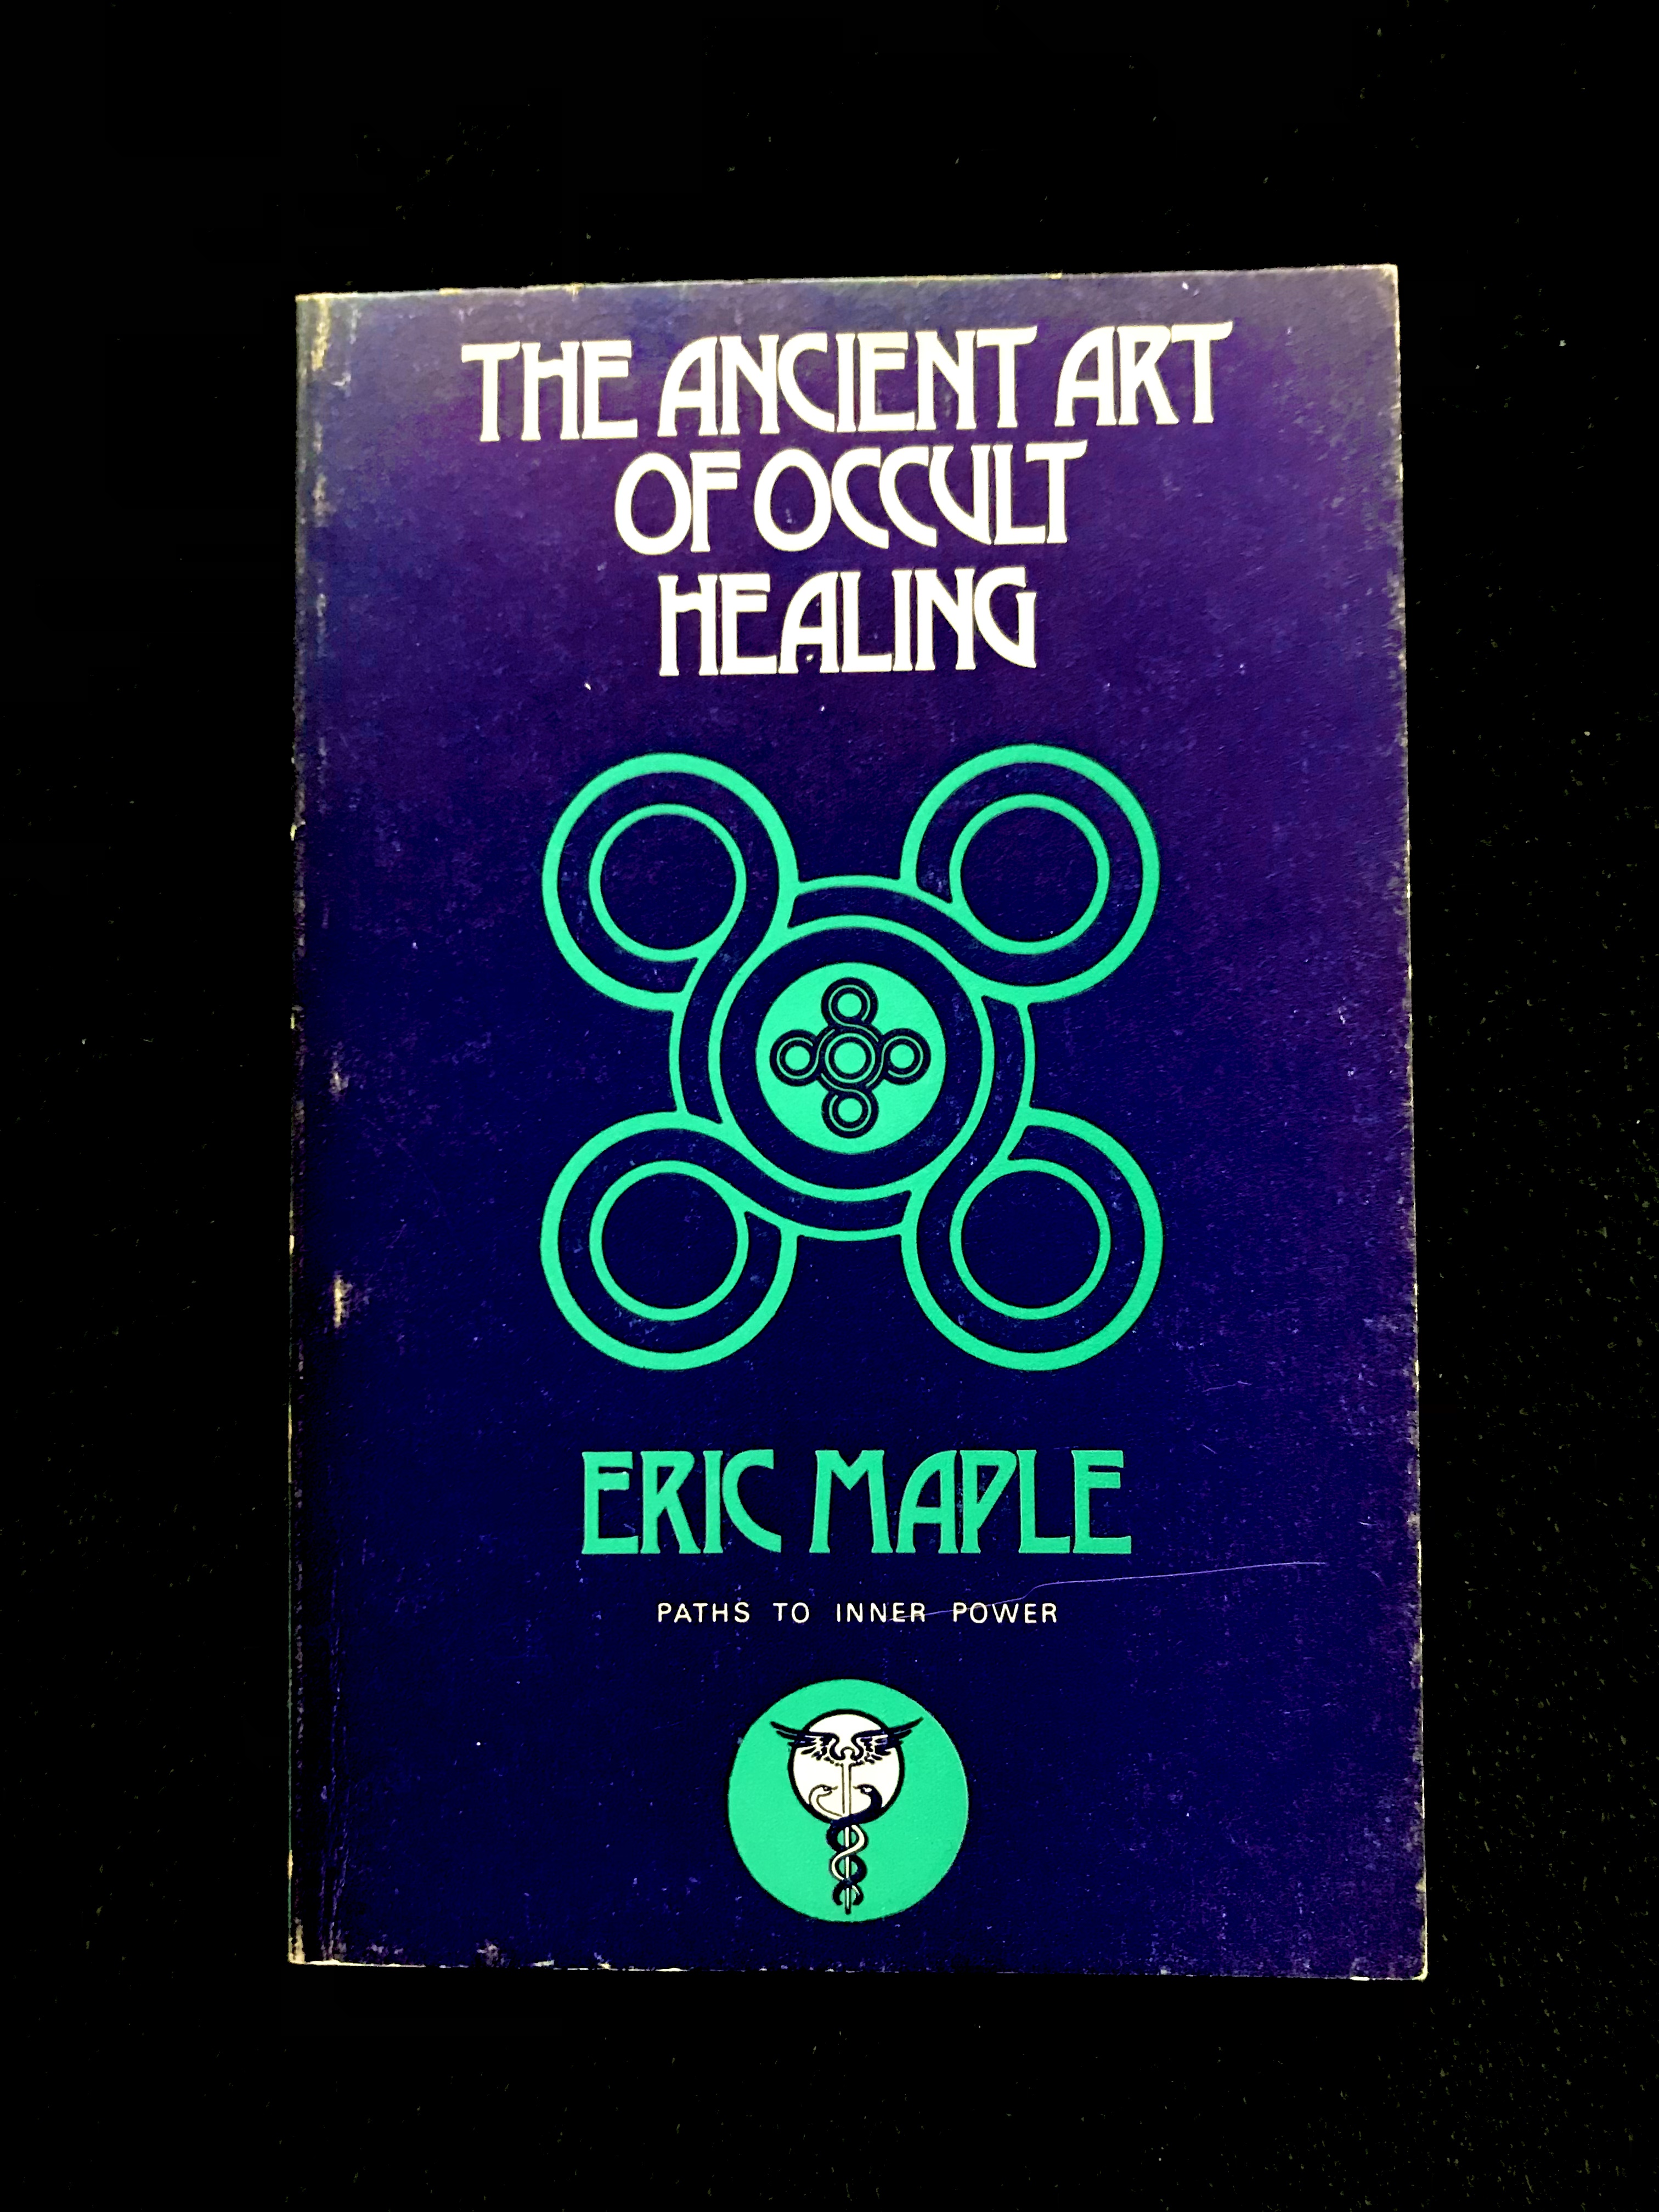 The Ancient Art of Occult Healing by Eric Maple